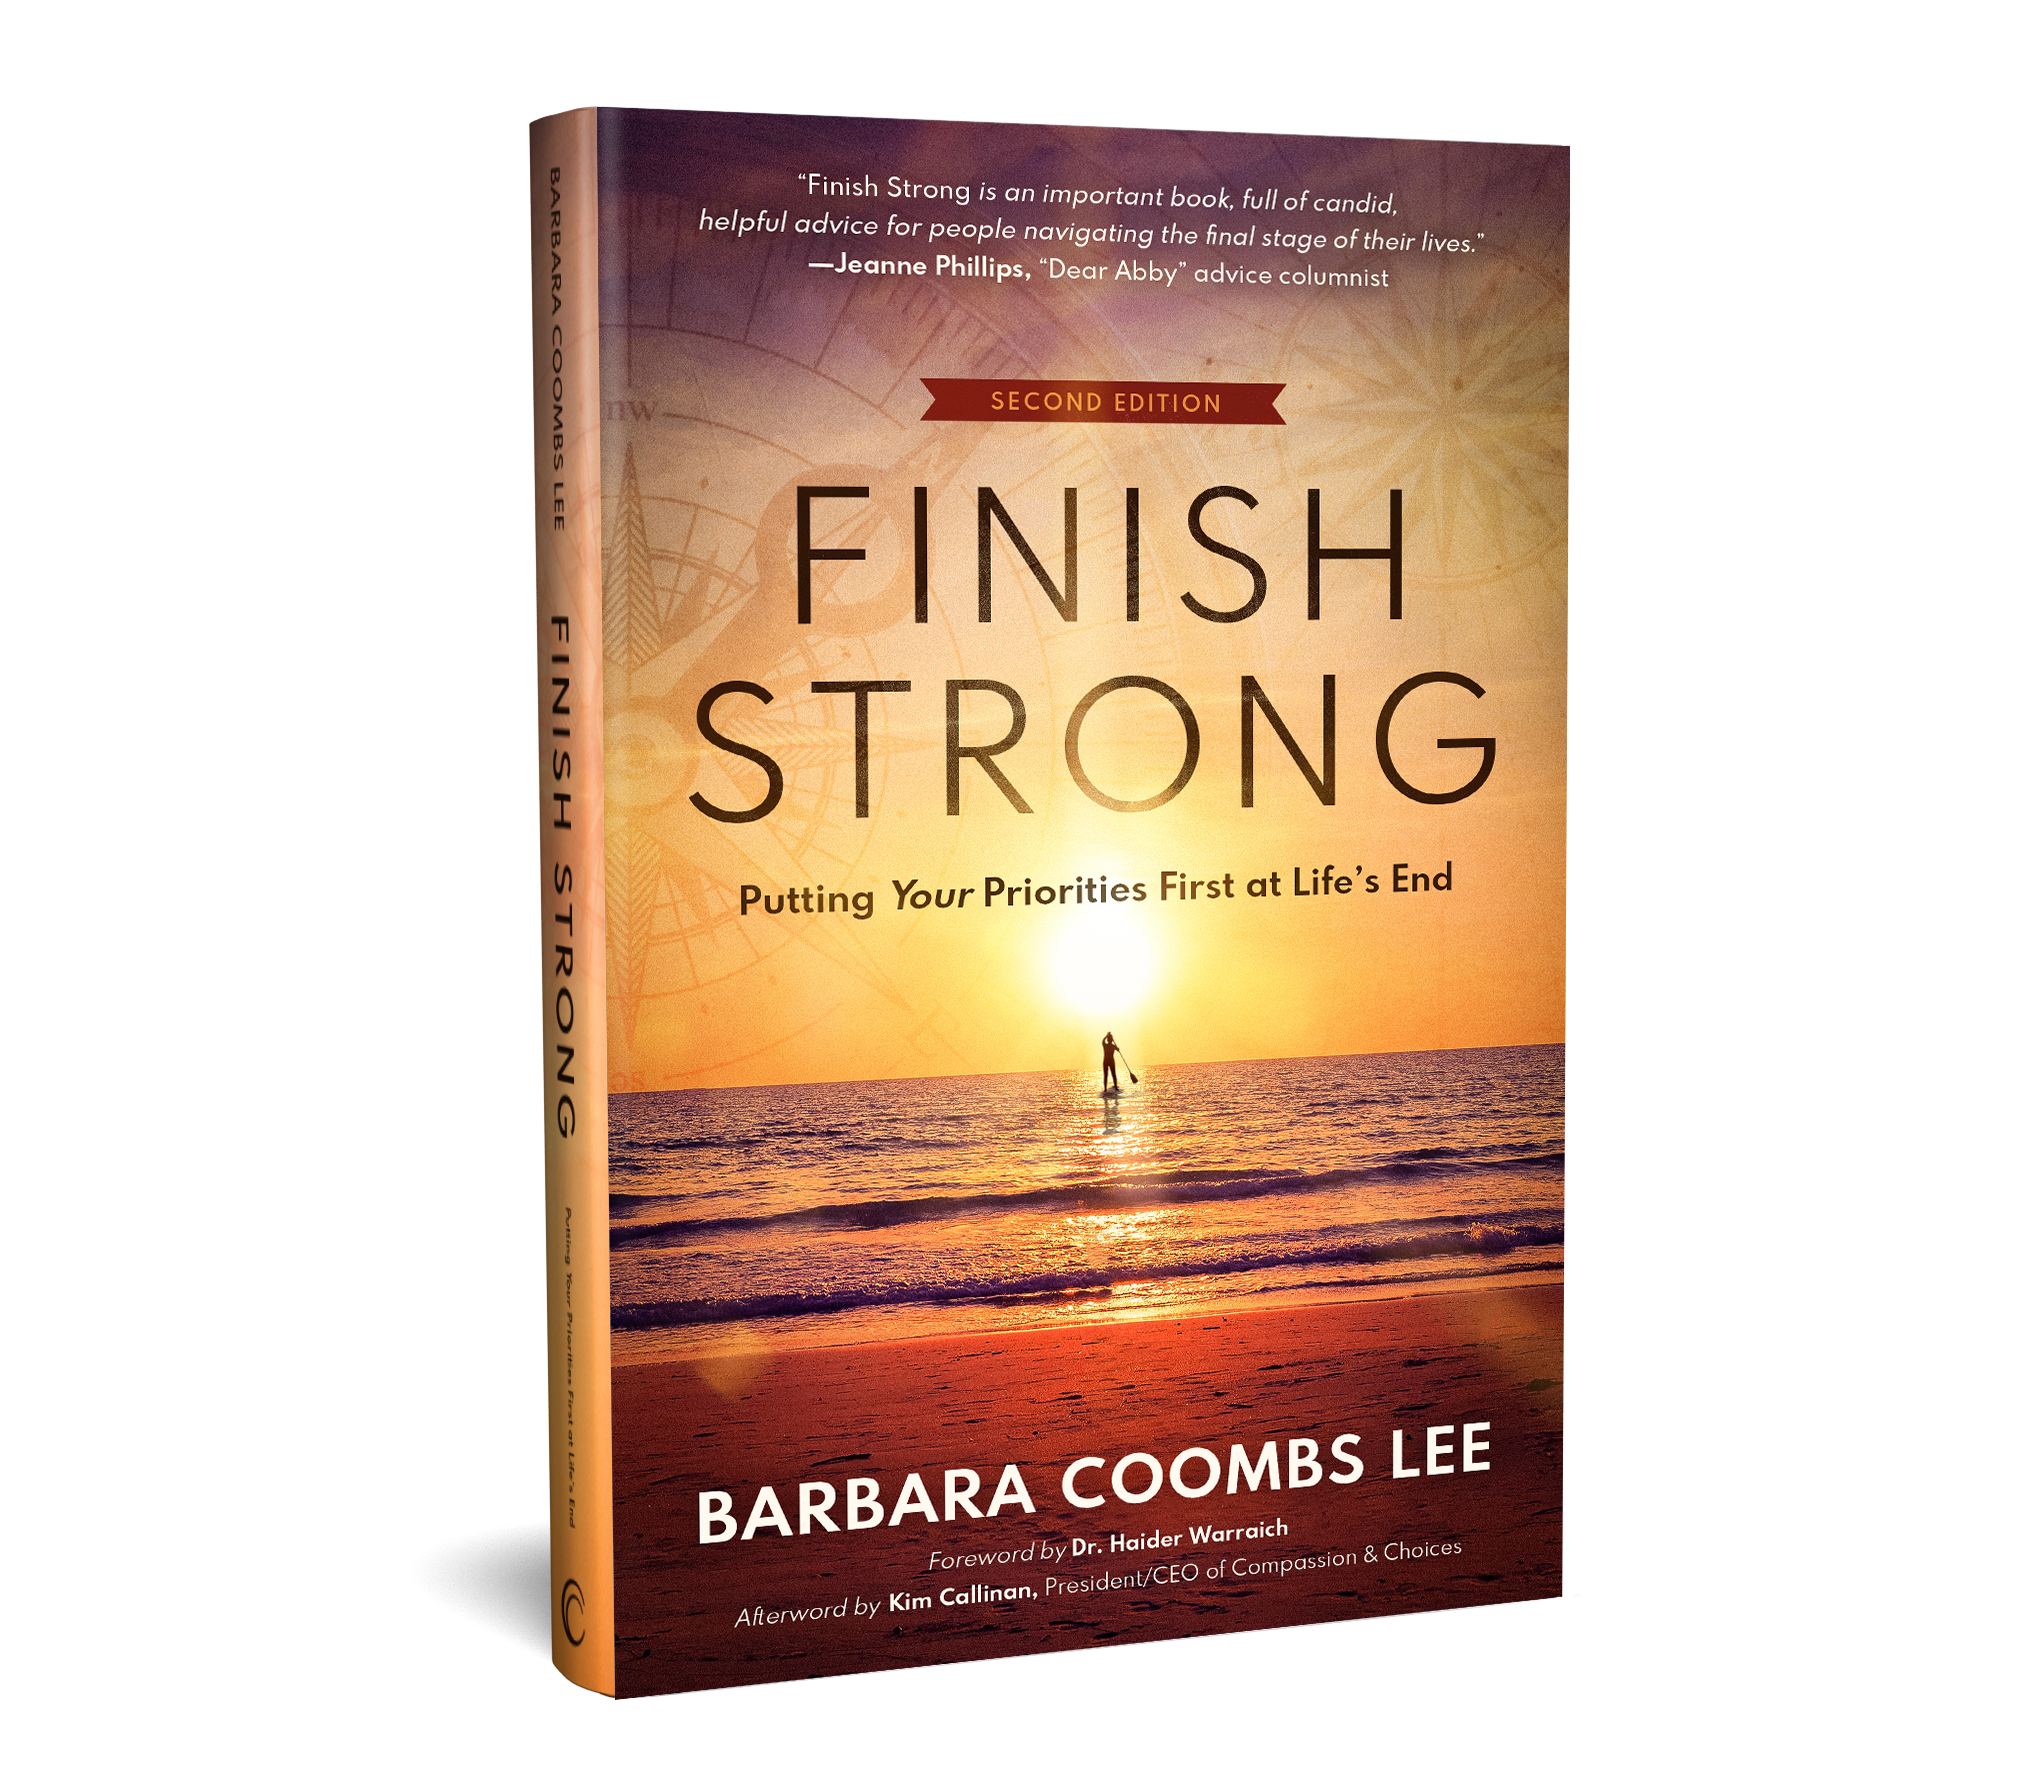 Finish Strong by Barbara Coombs Lee Book Rendering